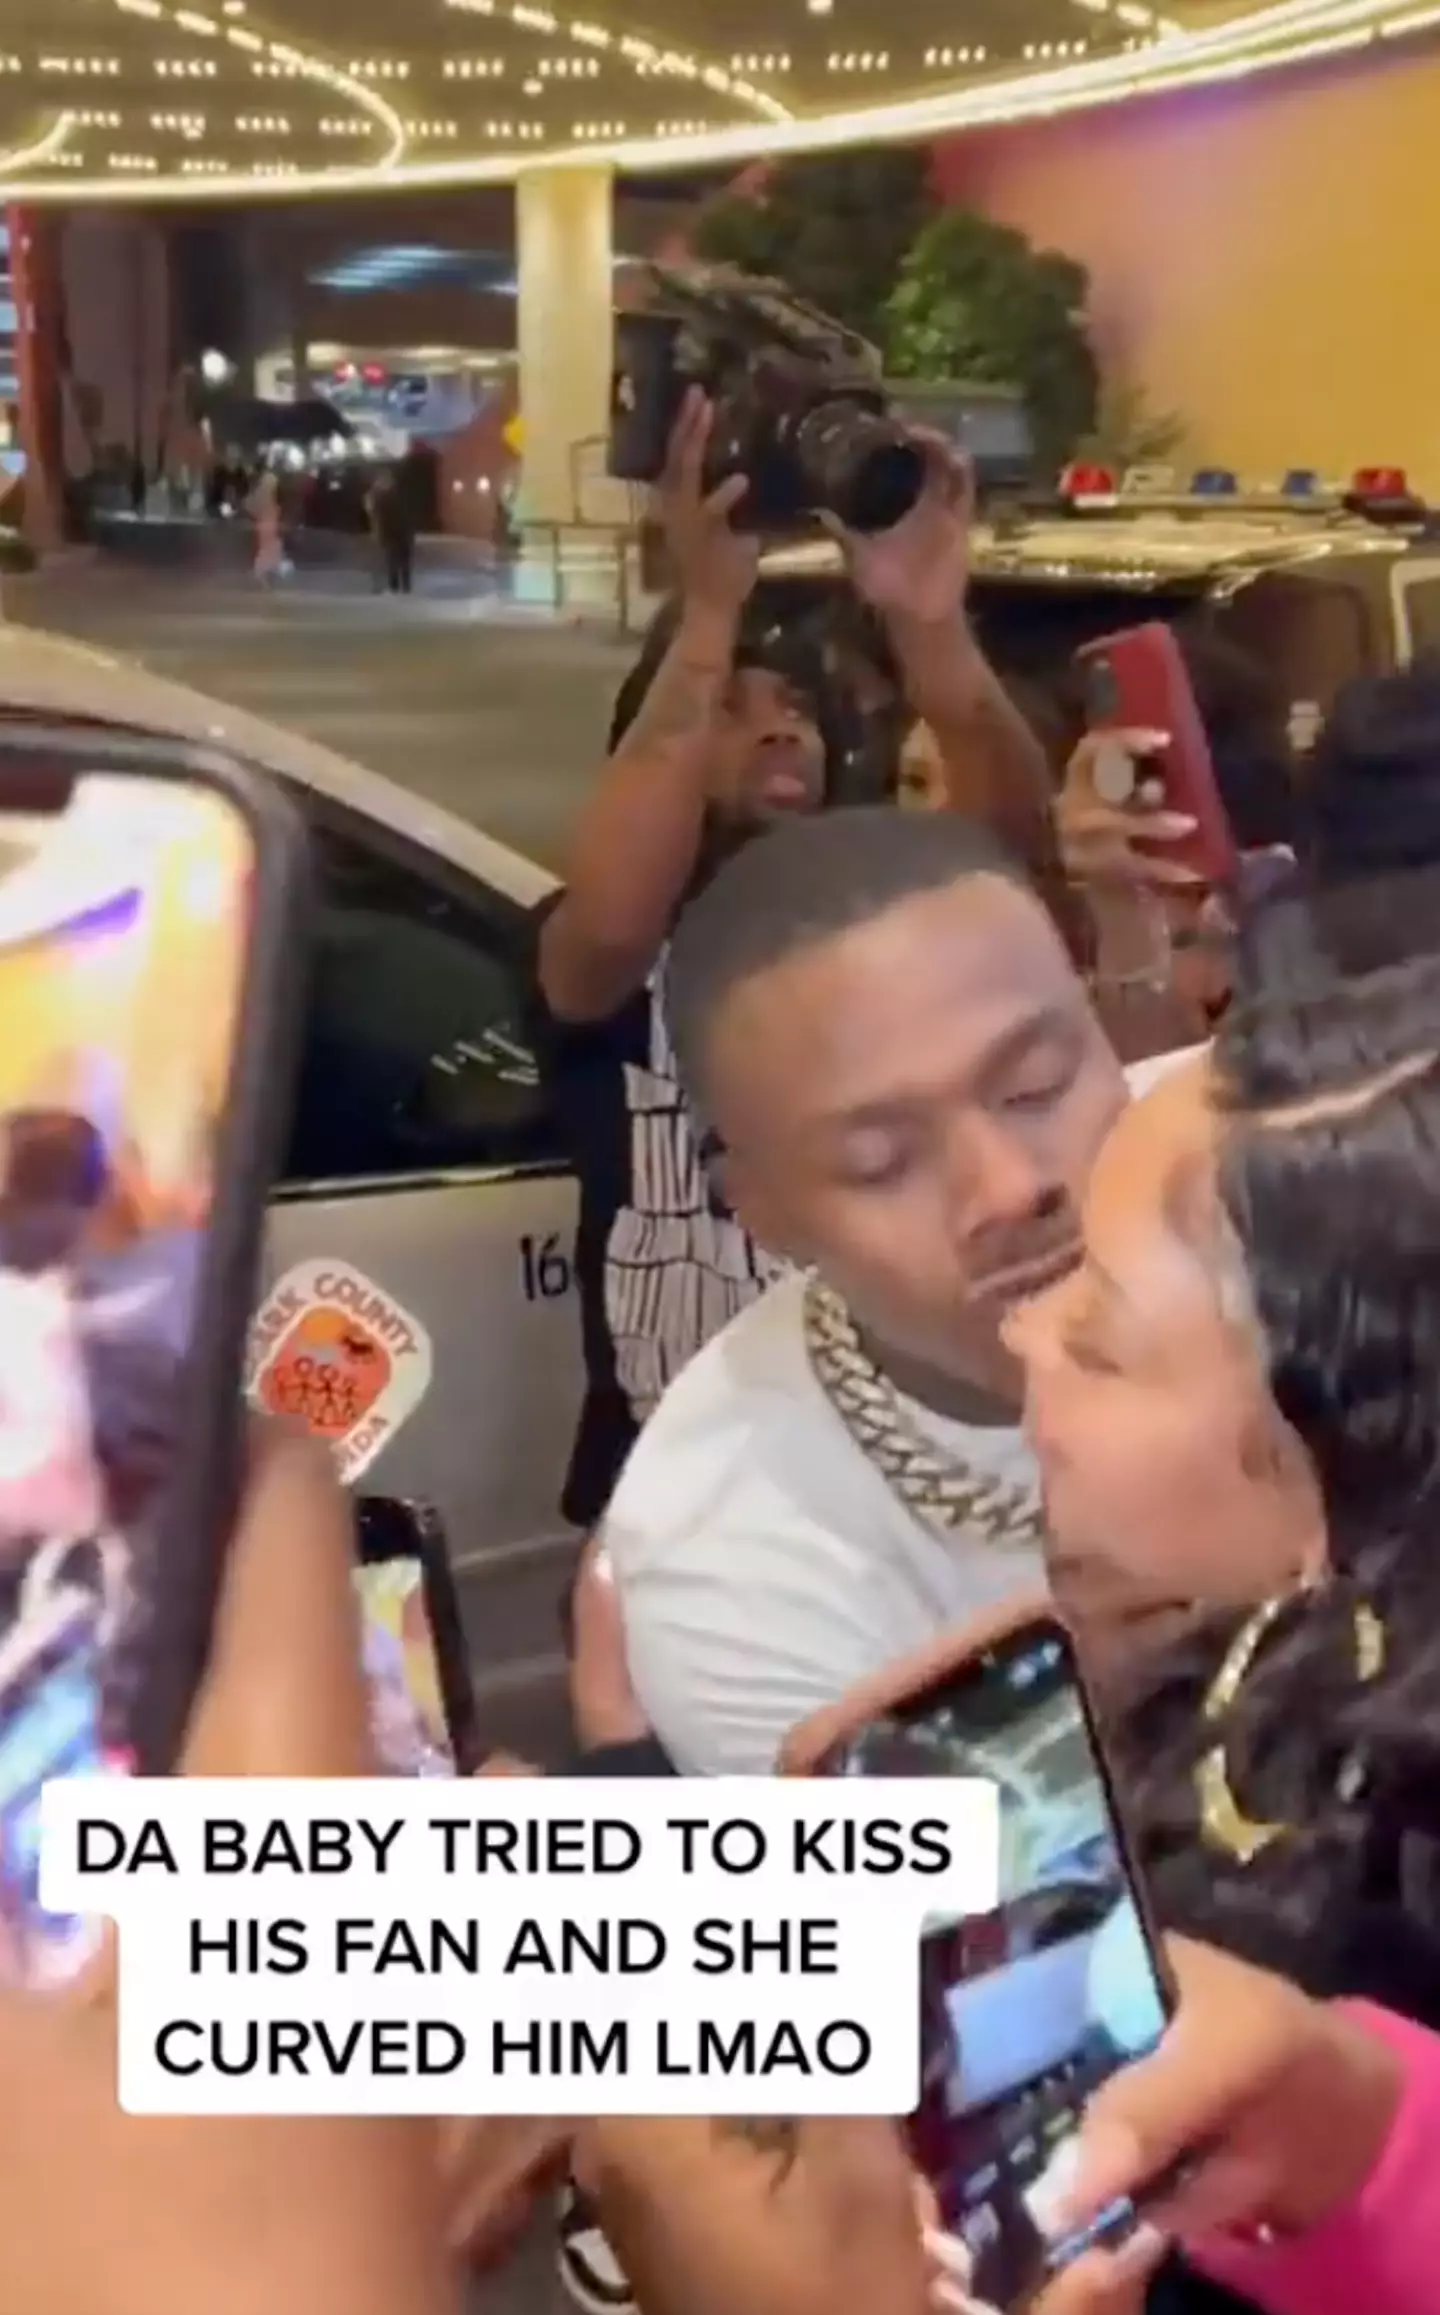 DaBaby says the woman was upset because he blew a kiss at her friend first.